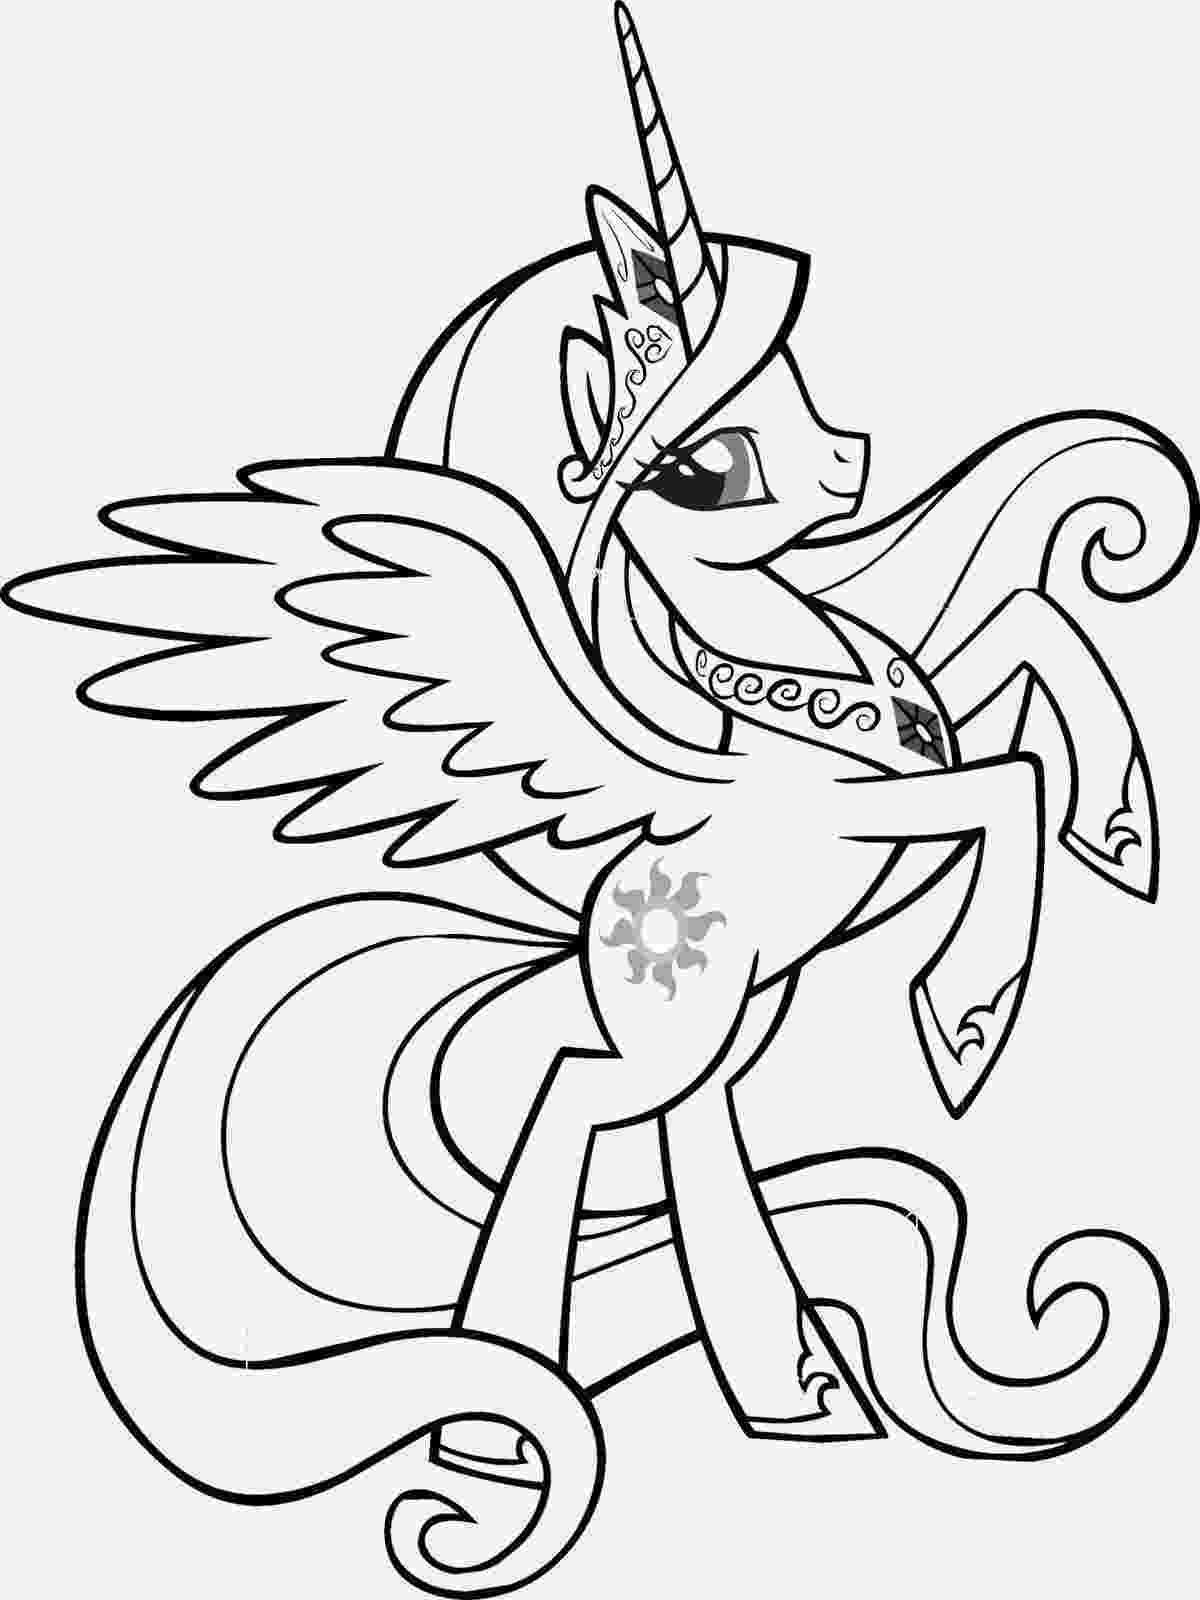 free unicorn pictures to color cute unicorn coloring page free printable coloring pages pictures color free unicorn to 